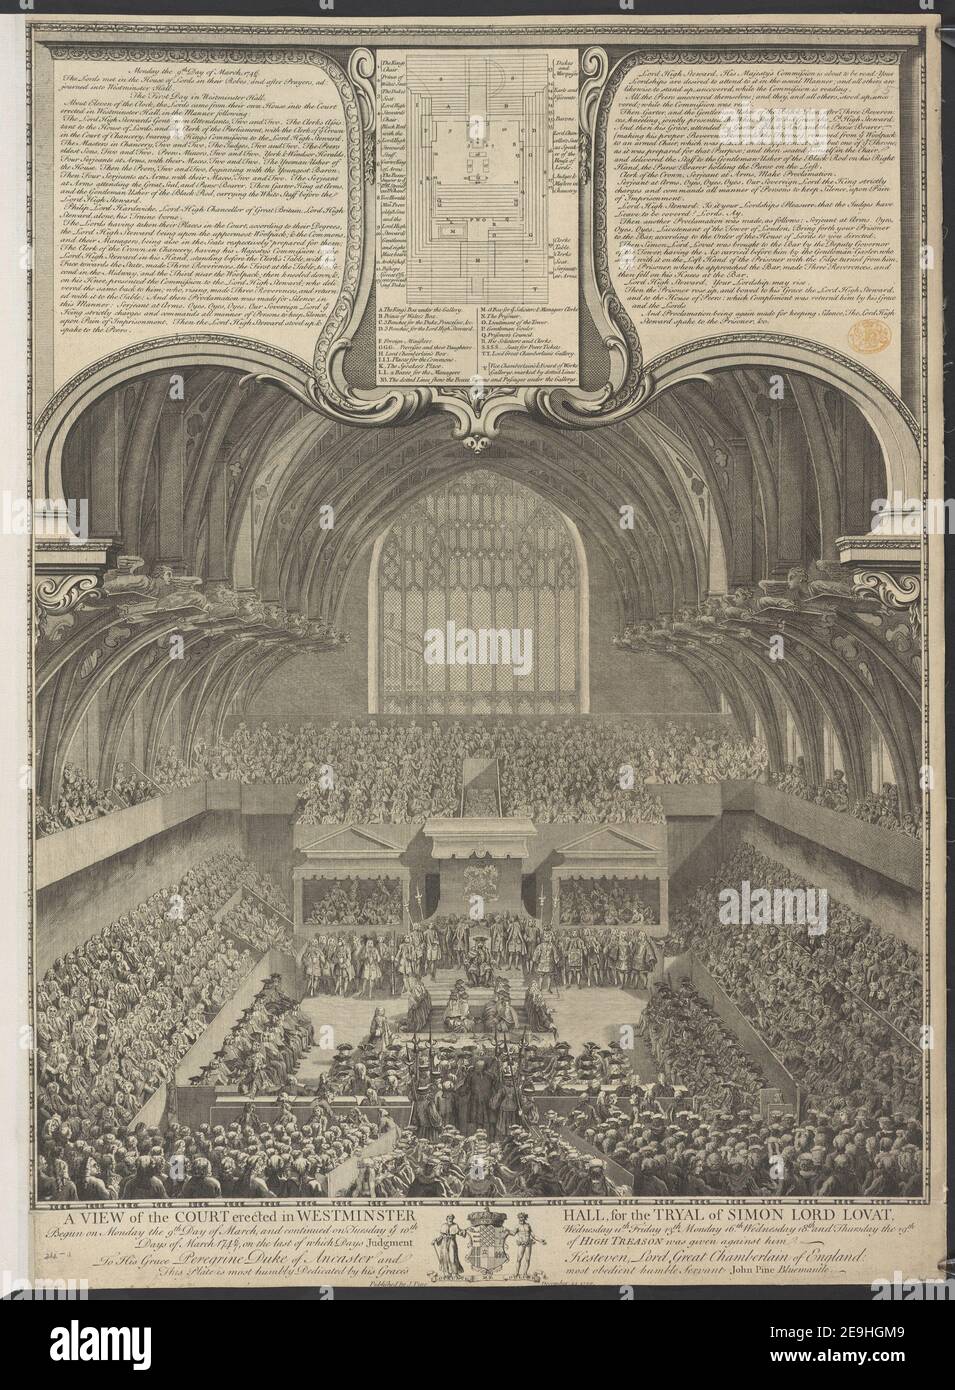 A VIEW of the COURT erected in WESTMINSTER HALL for the TRYAL of SIMON LORD LOVAT  Author  Basire, James 24.24.d. Place of publication: [London] Publisher: Published by J. Pine, Date of publication: December 25 1750.  Item type: 1 print Medium: etching and engraving Dimensions: sheet 63 x 46 cm (trimmed)  Former owner: George III, King of Great Britain, 1738-1820 Stock Photo